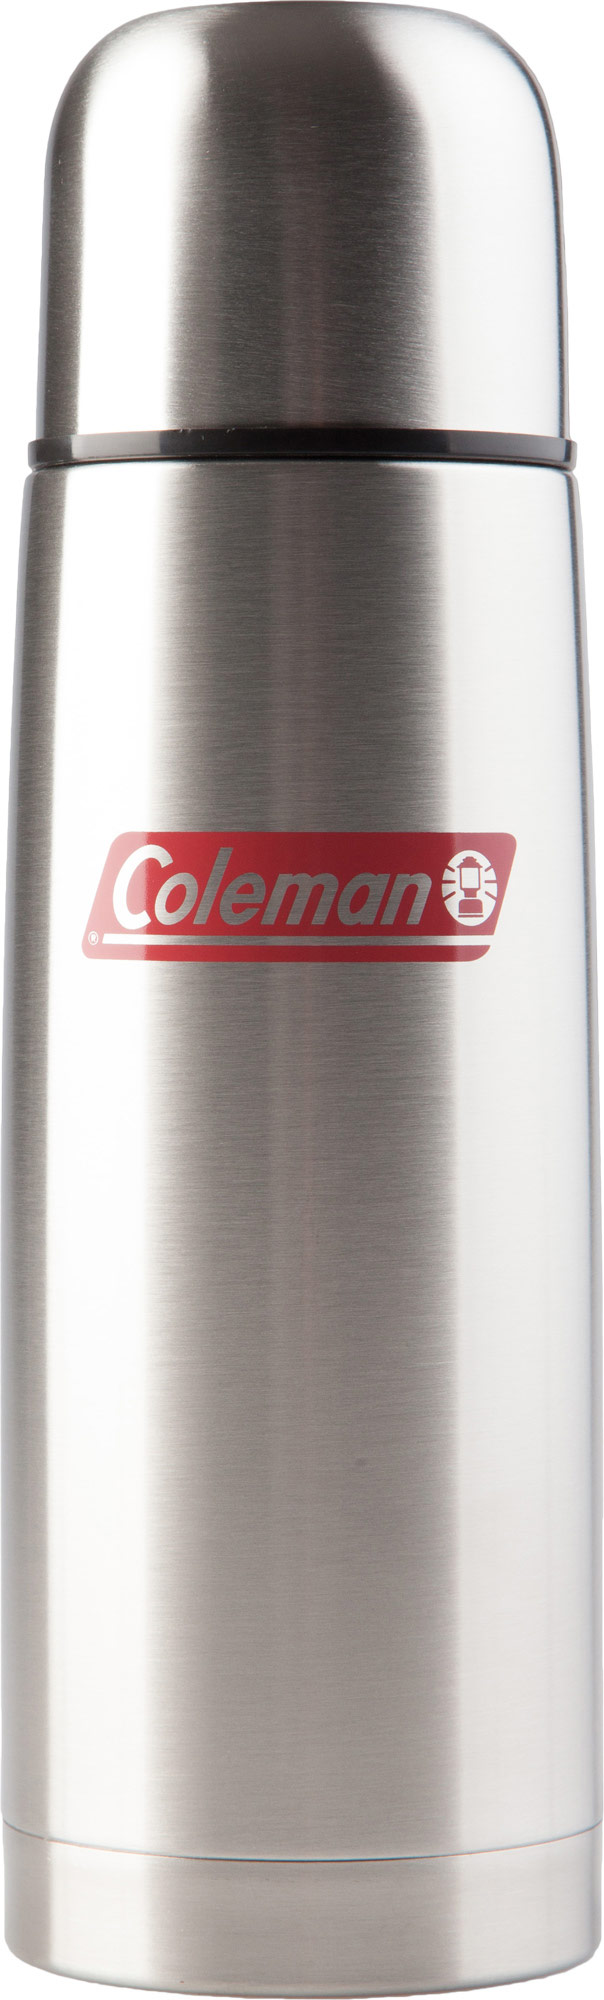 Stainless steel thermos